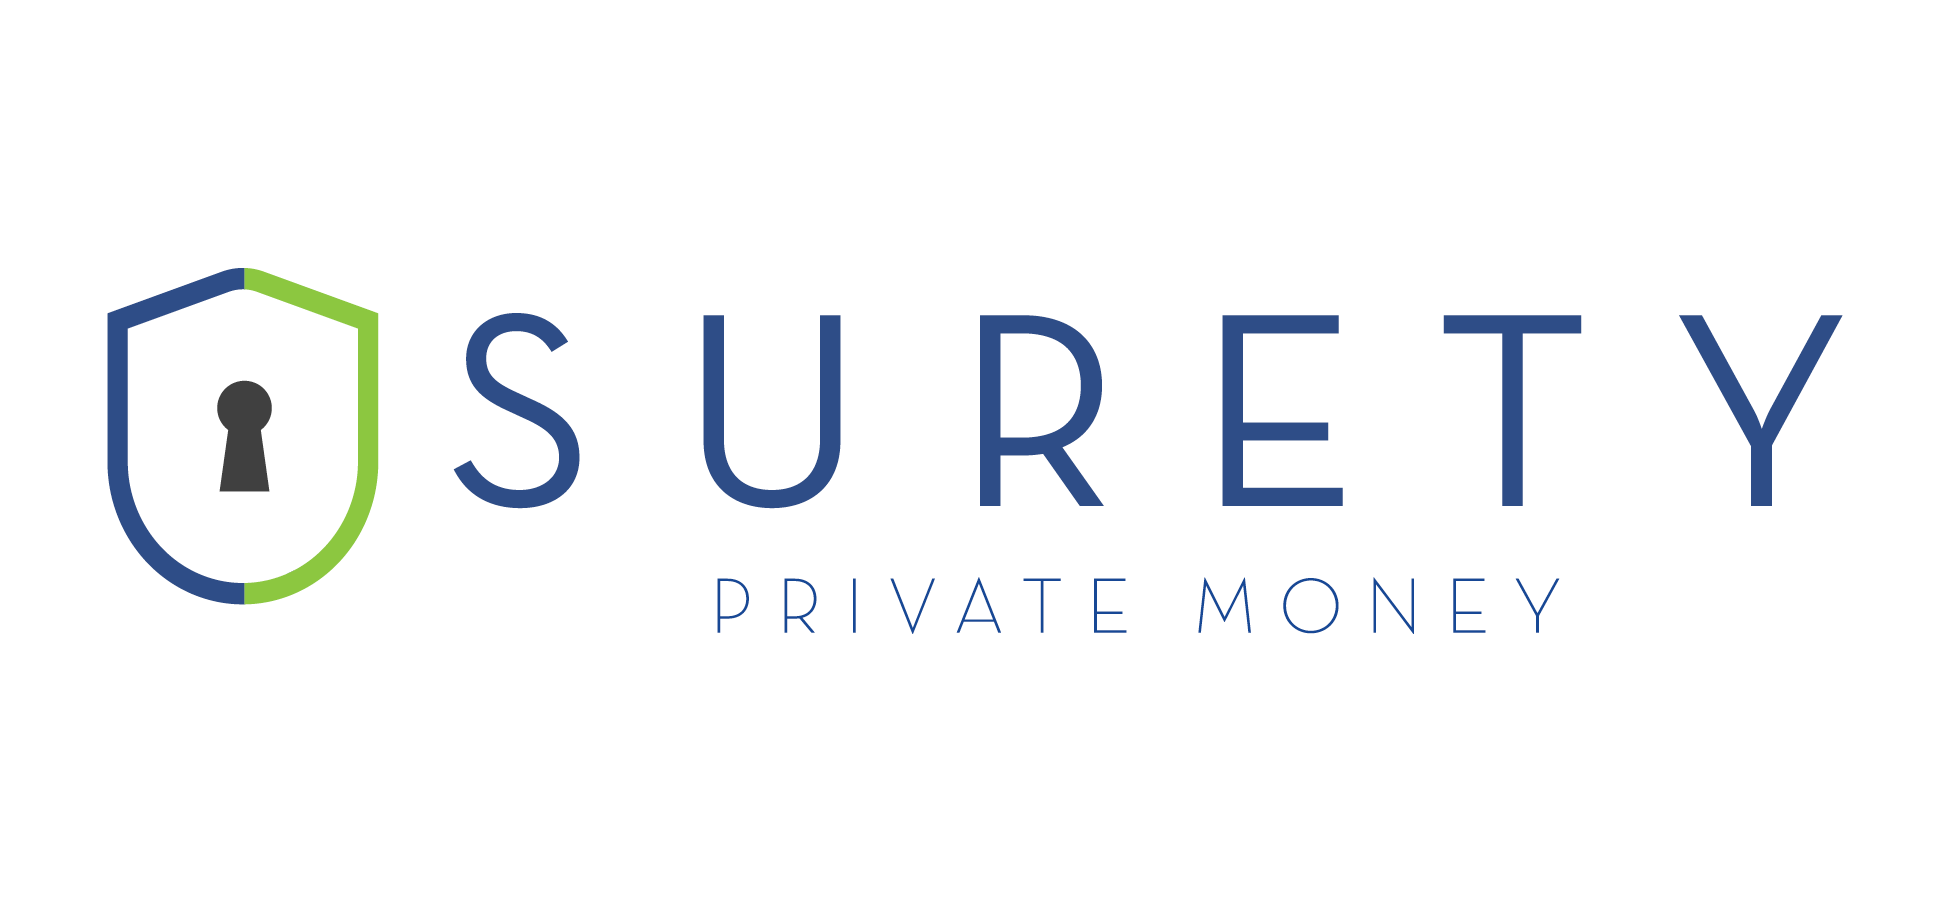 Surety Private Money - Angel Investor - Private Equity